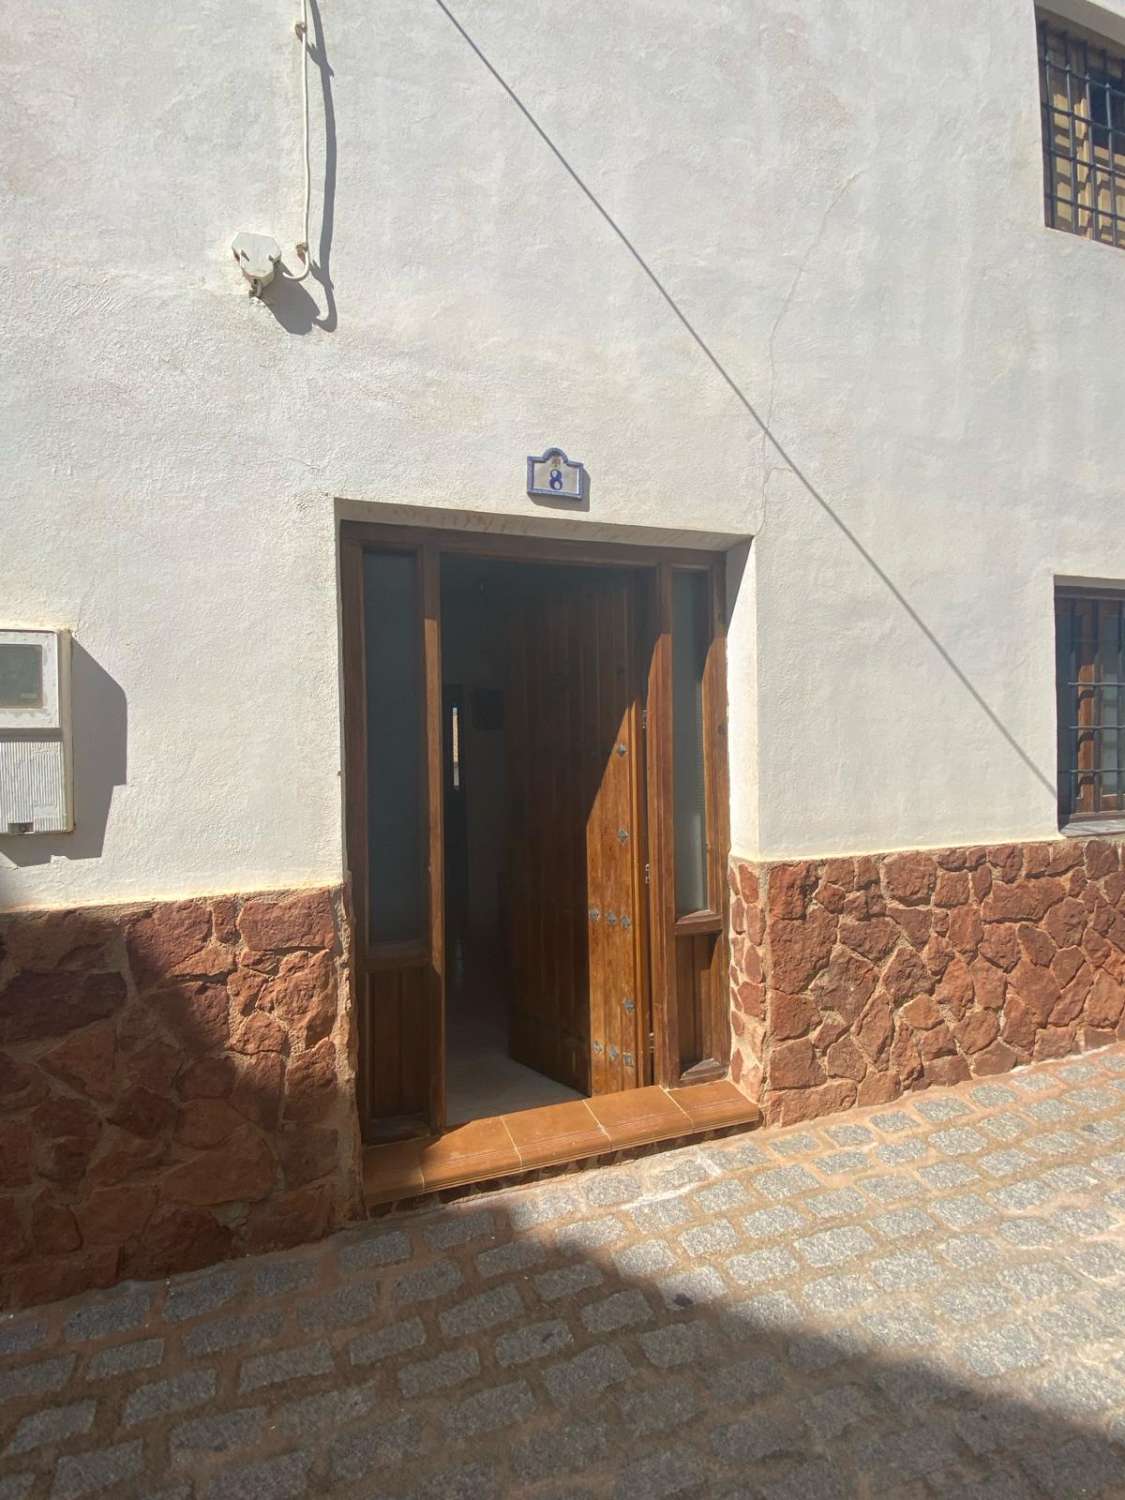 4/5 Bedroom, detached house with cave in Freila